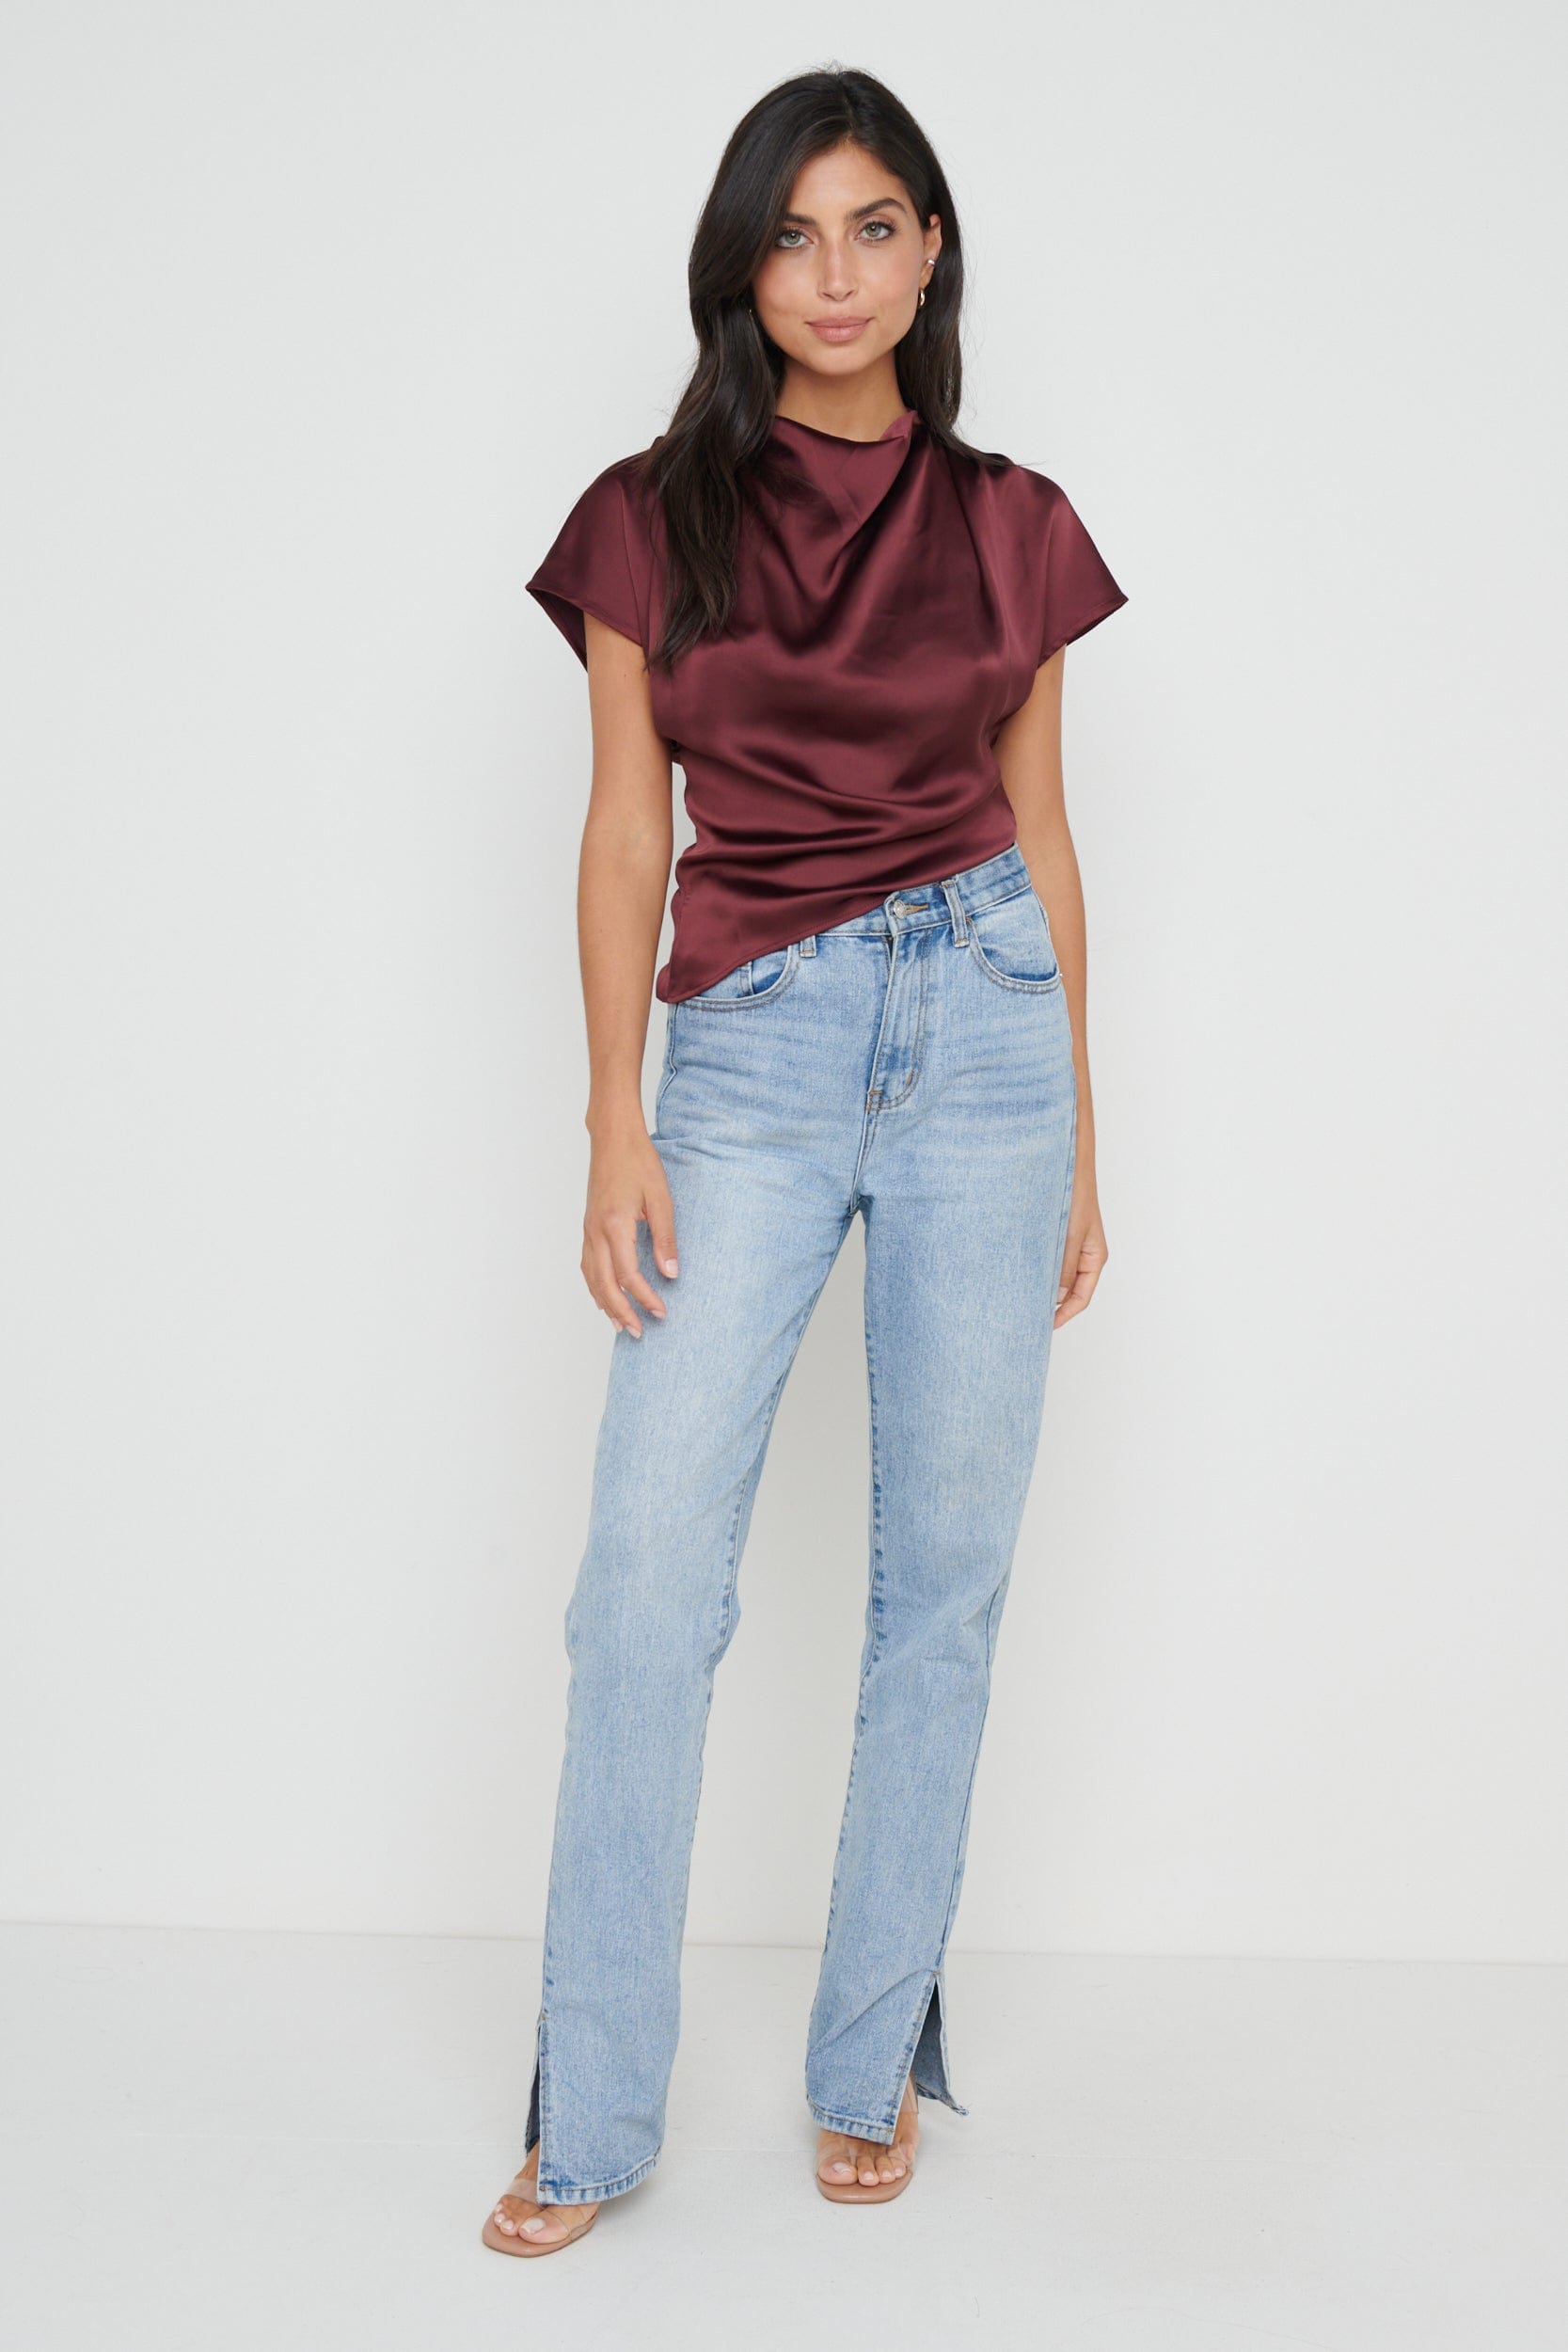 Lilith Cropped Blouse - Wine